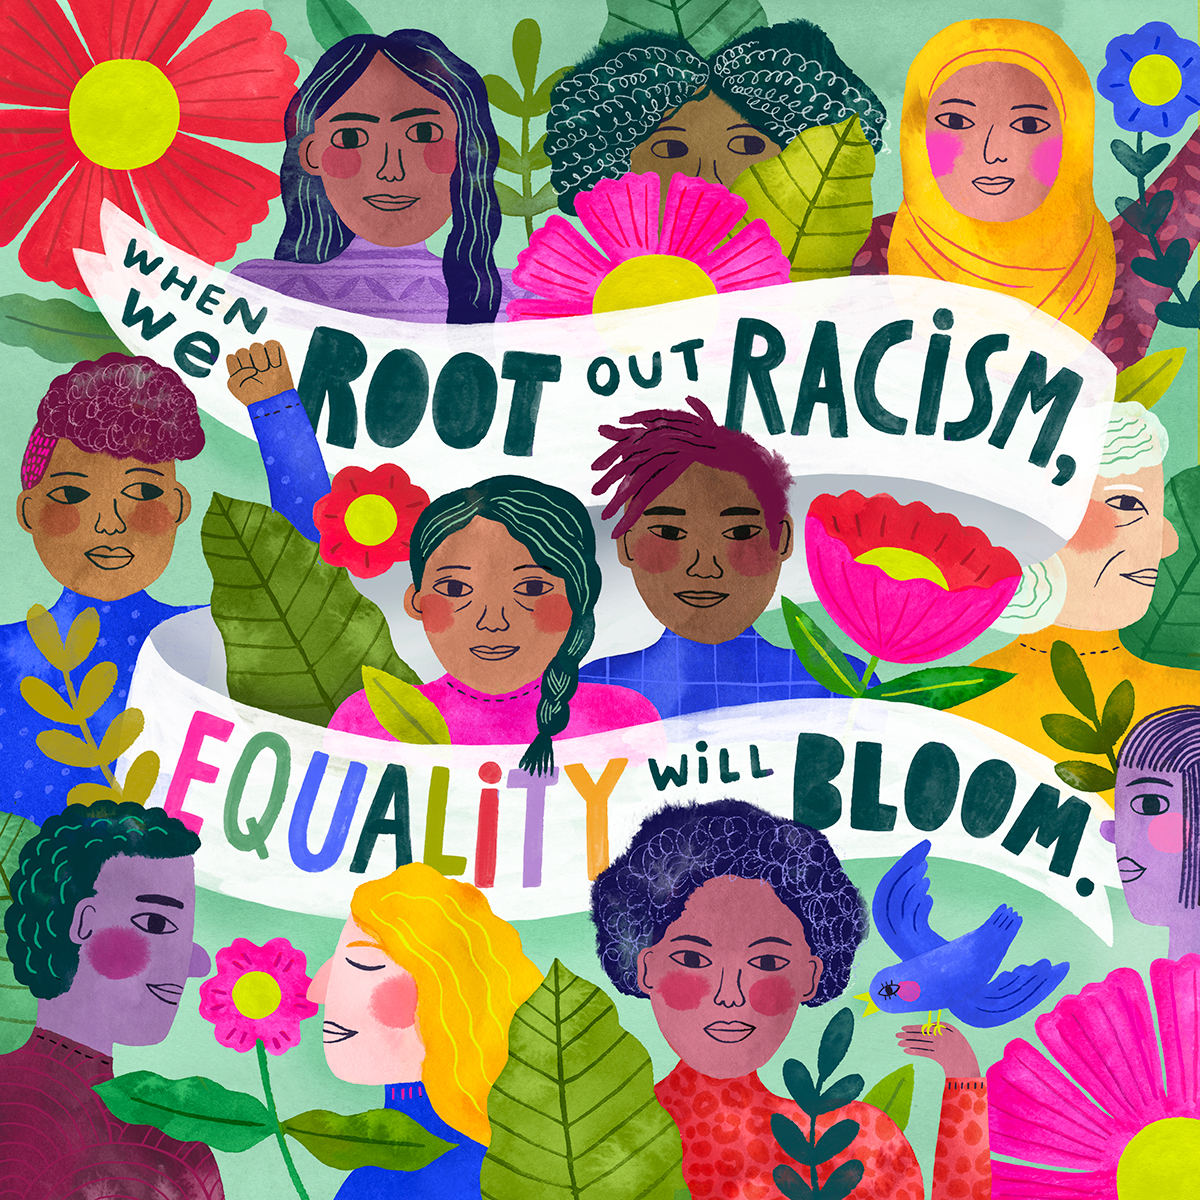 Collage by Jade Orlando with a ribbon that reads "When we root out racism, equality will bloom"